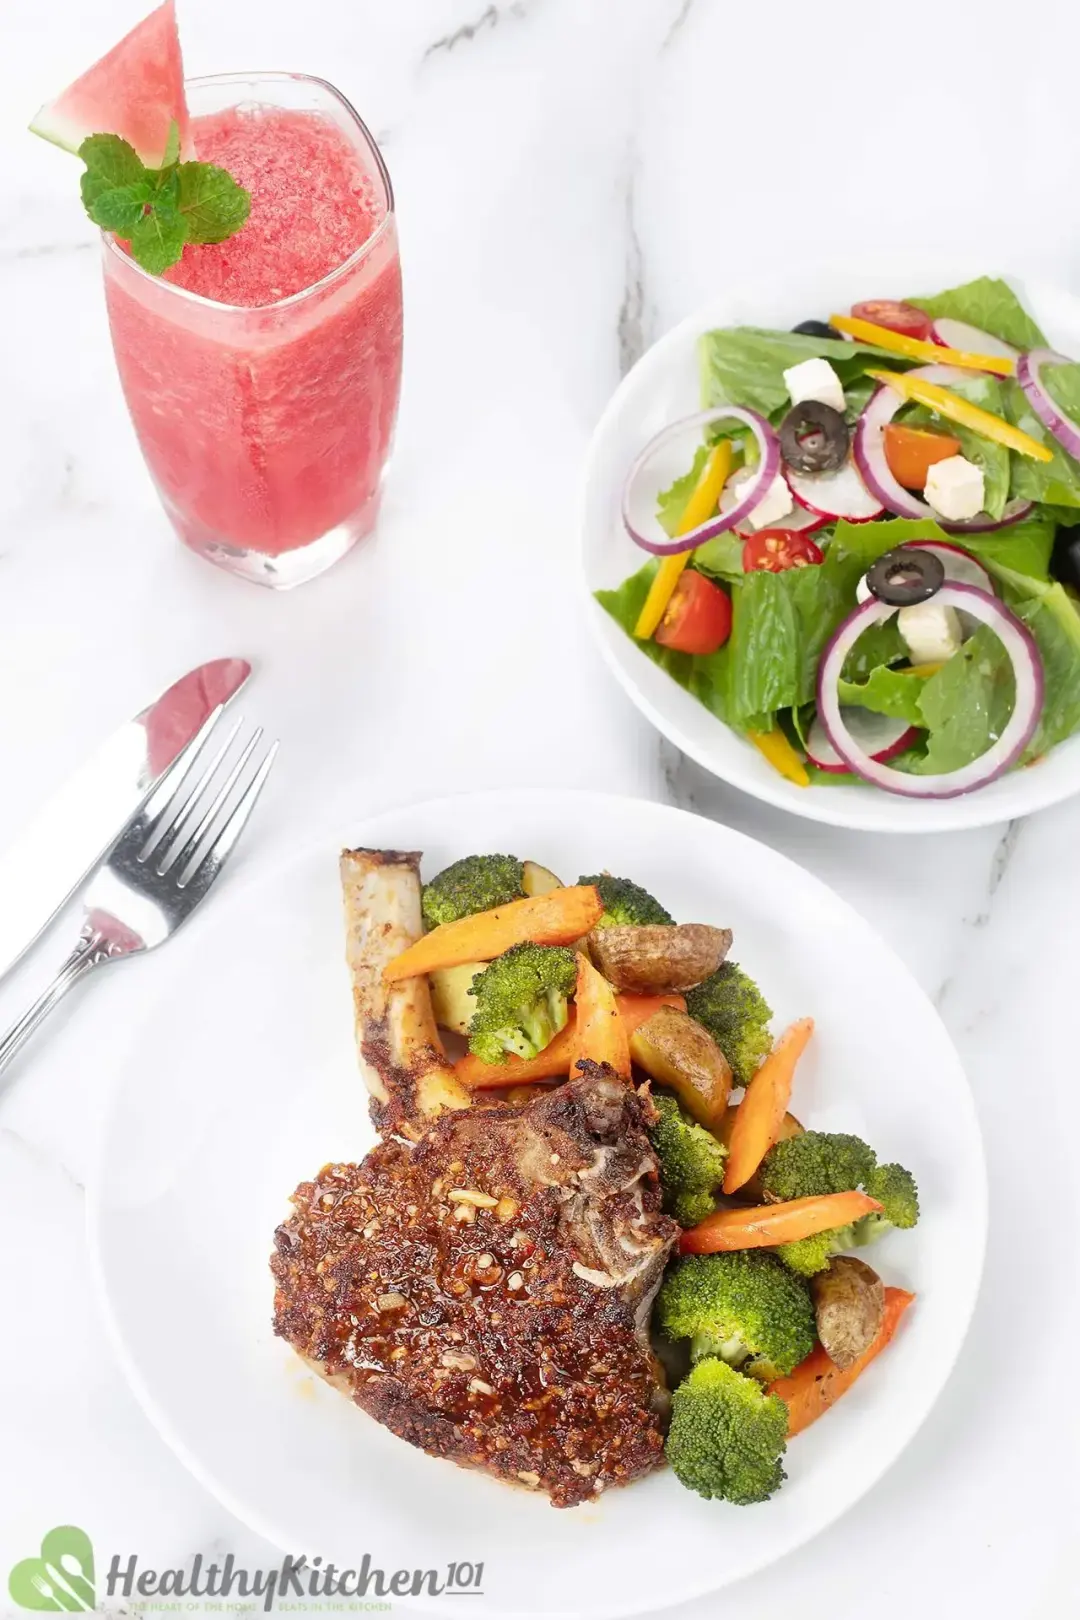 What to Serve with This Healthy Baked Pork Chops Recipe